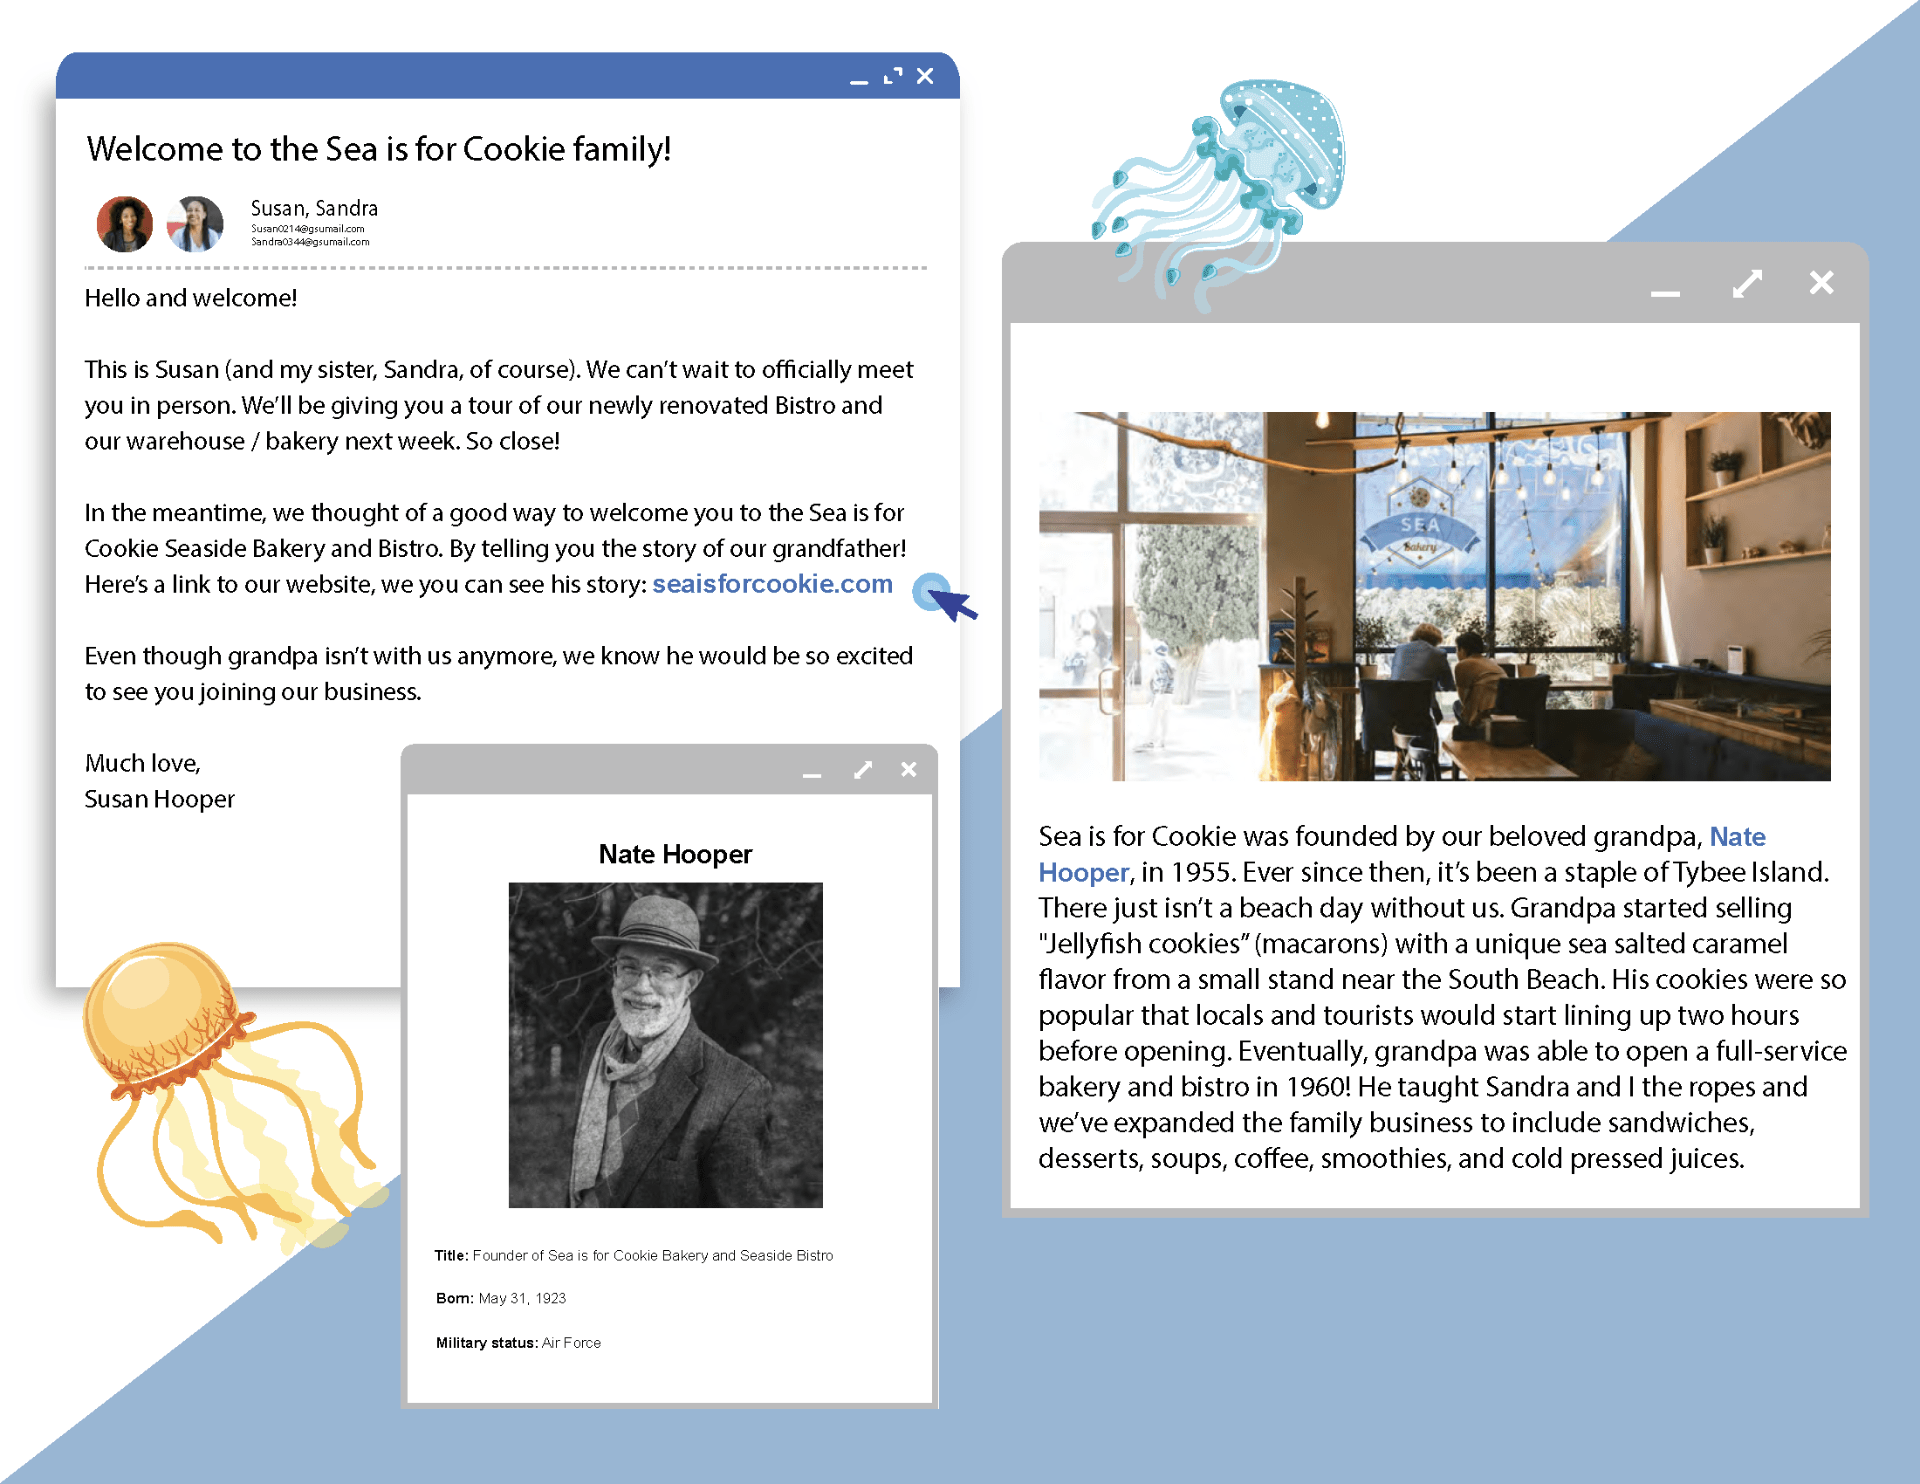 Pop-up window of welcoming email from Susan and Sandra Hooper, the fictional CEOs of Sea is for Cookie Seaside Bakery and Bistro.